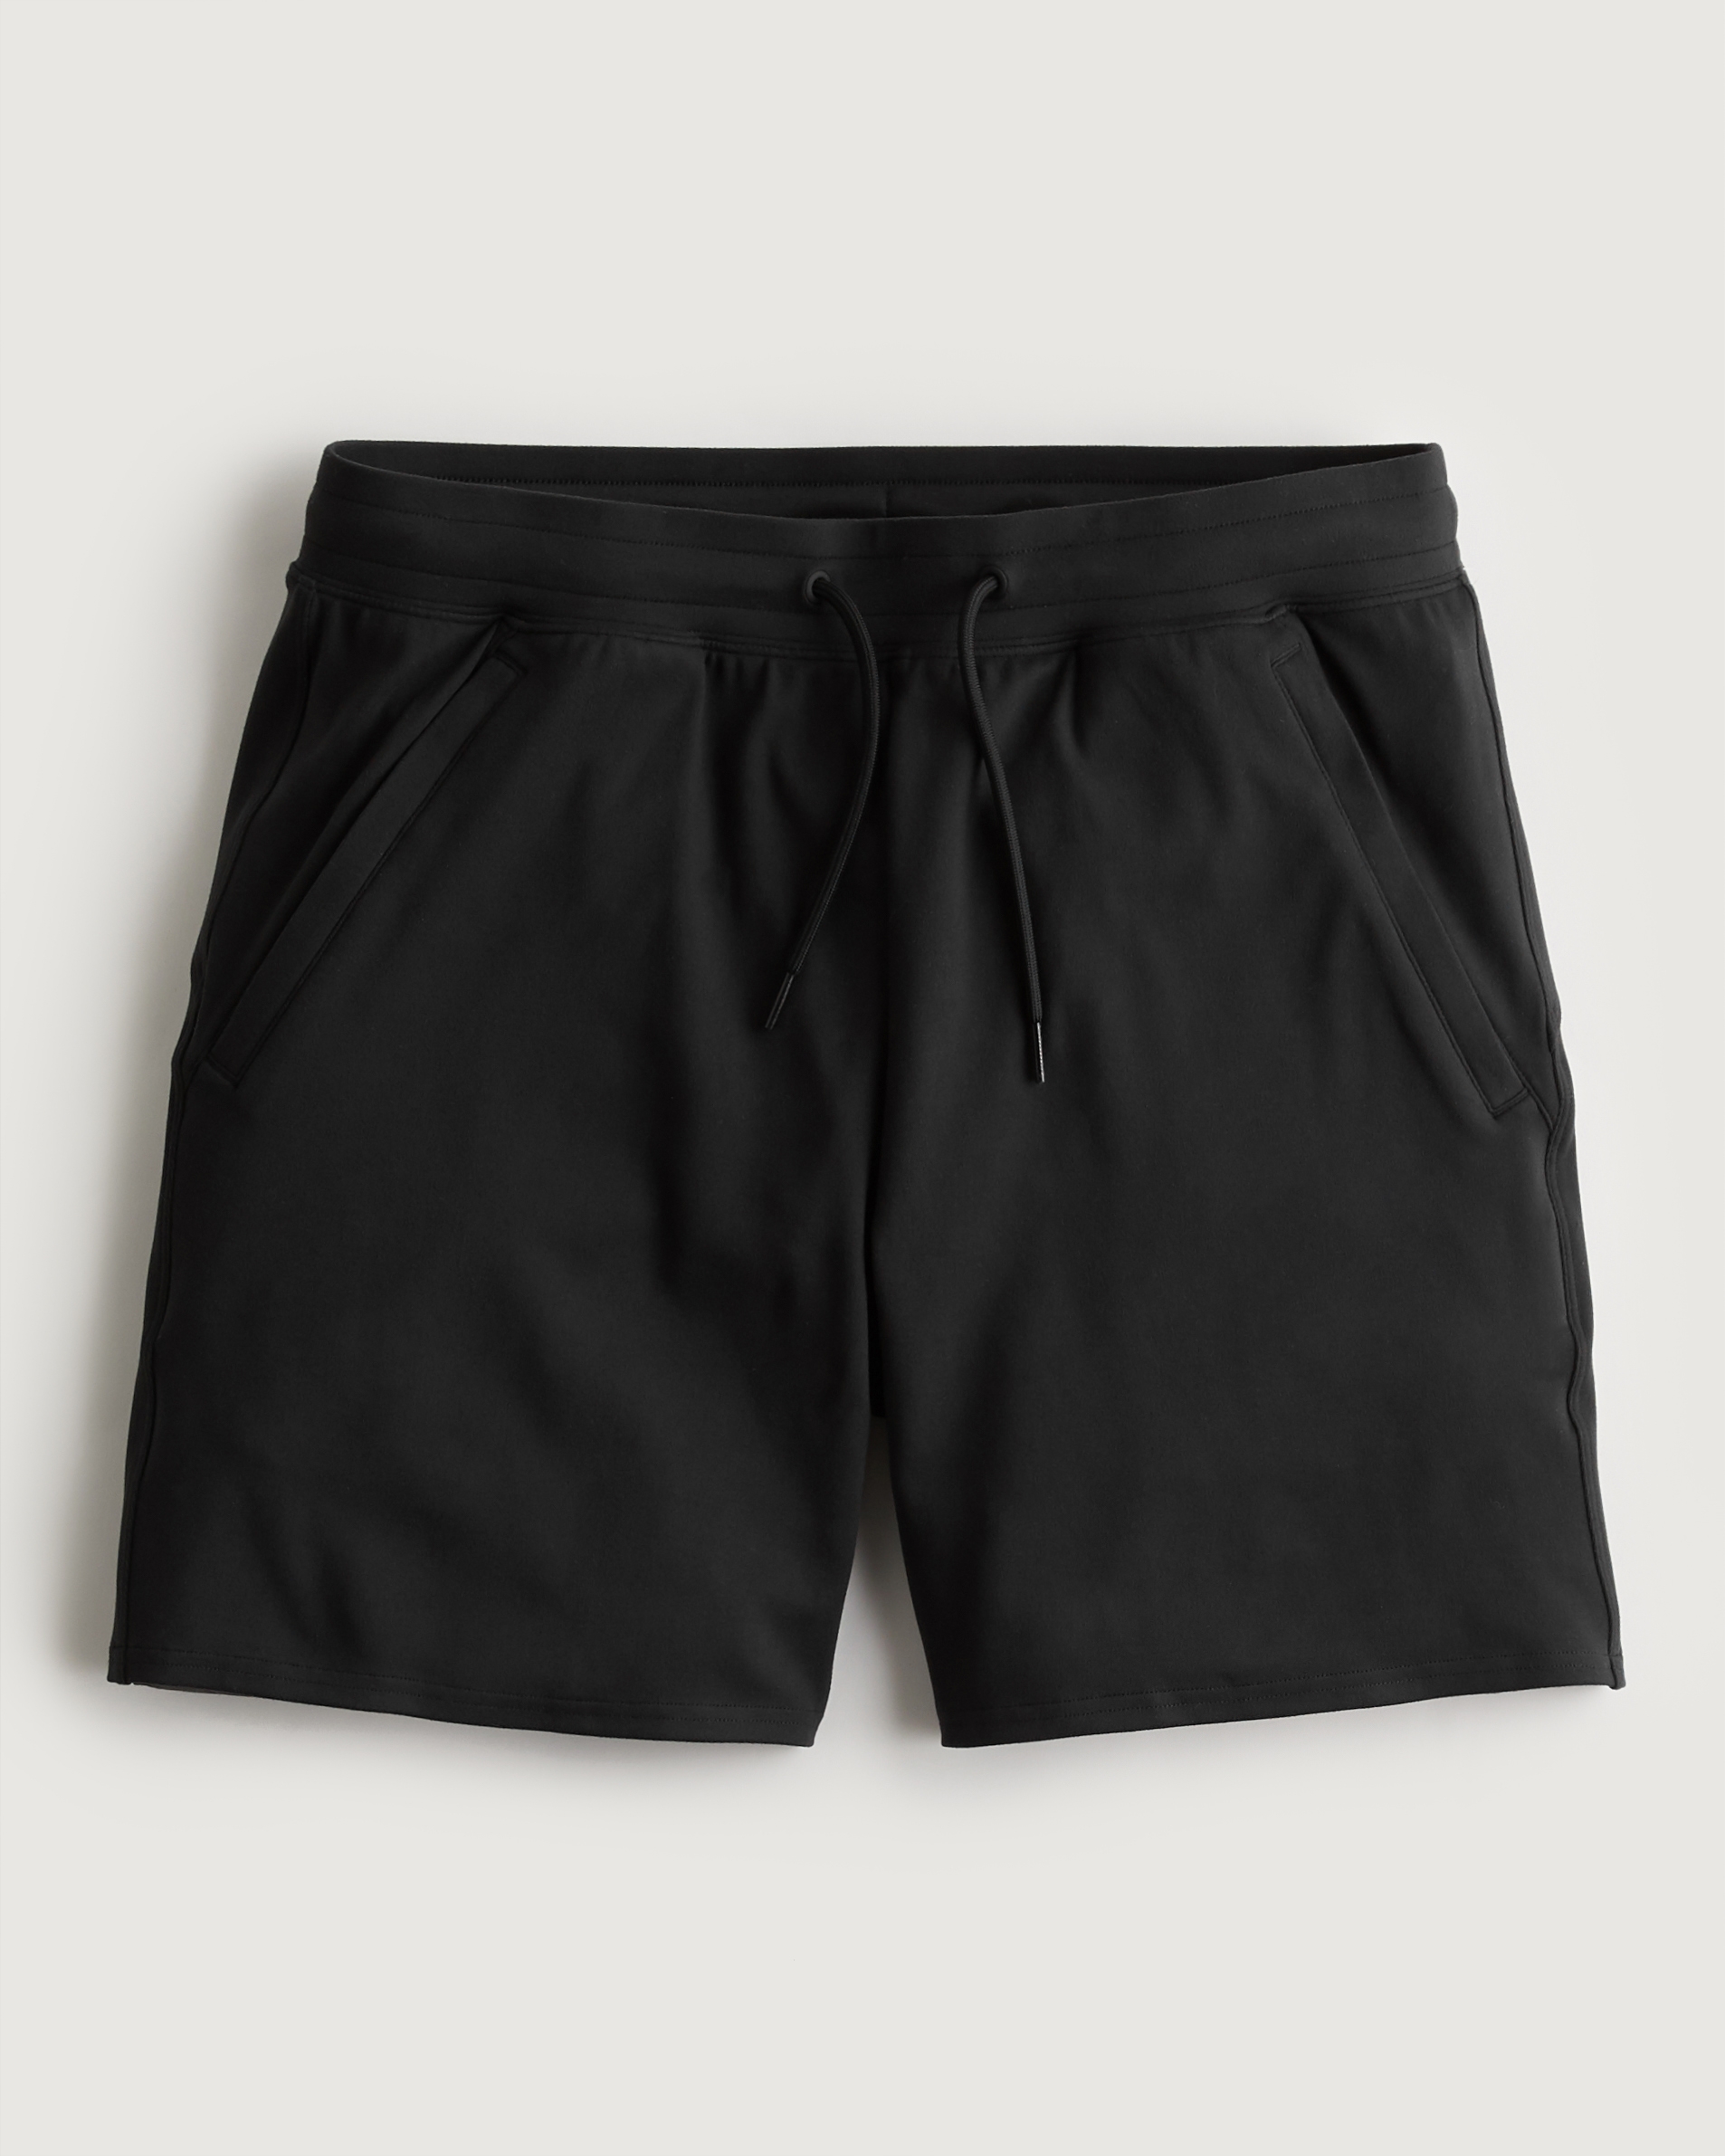 Gilly Hicks Active Recharge Shorts 7"